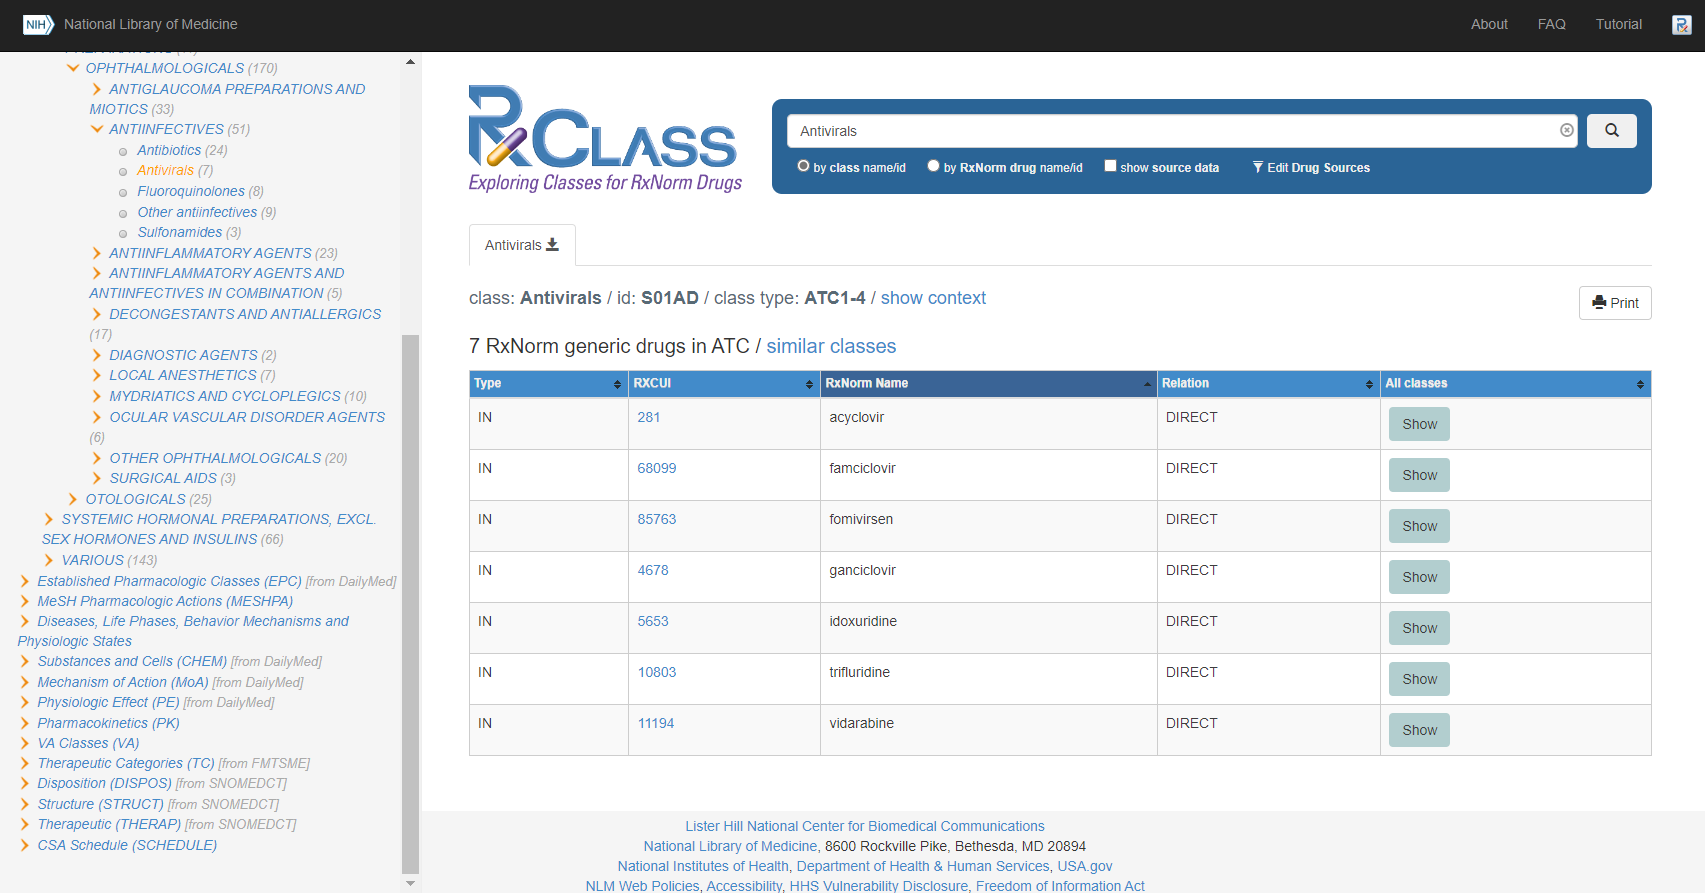 sample view of RxClass Browser